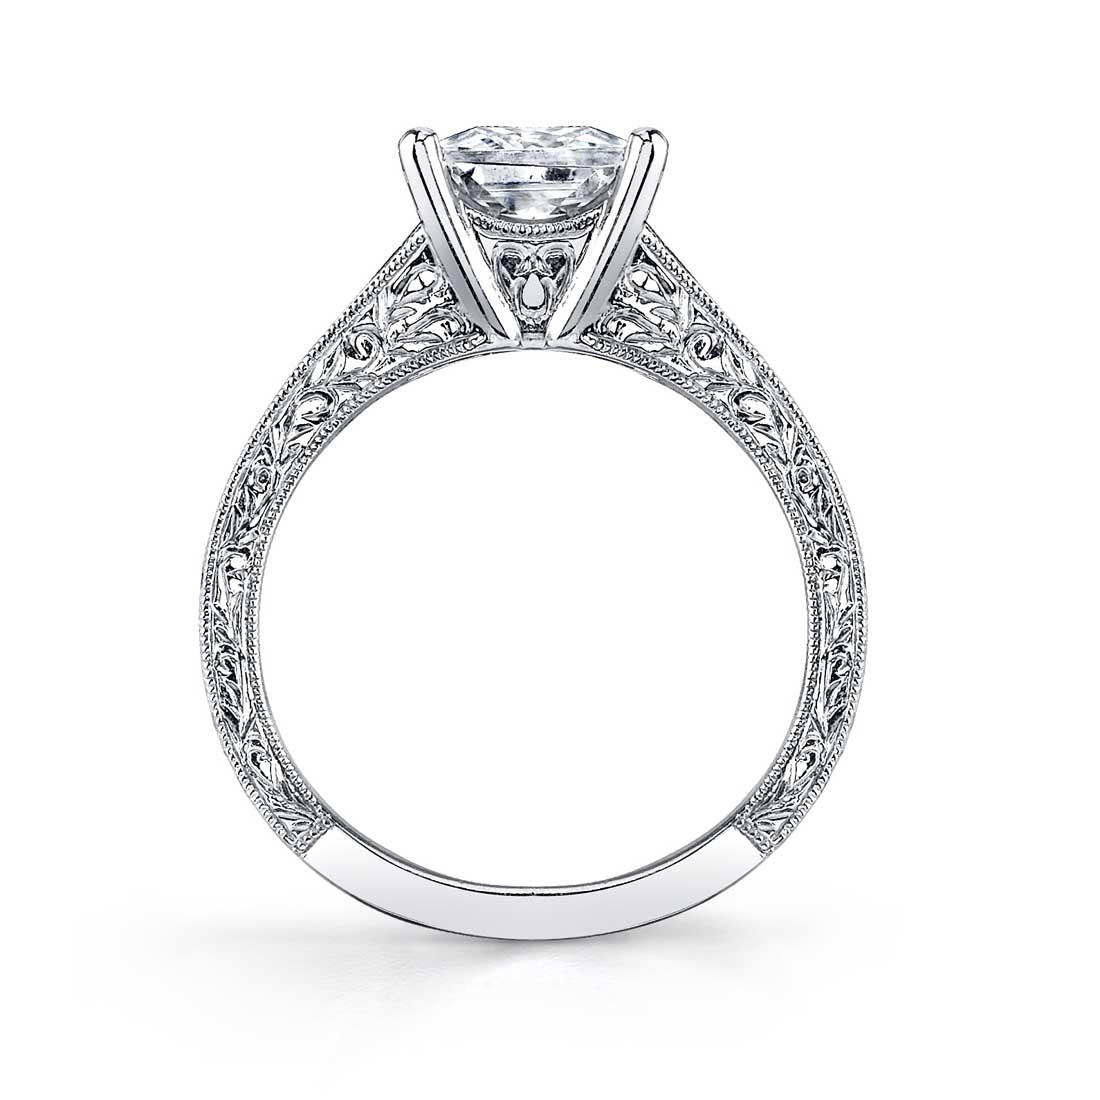 Profile Image of a Princess Cut Engagement Ring